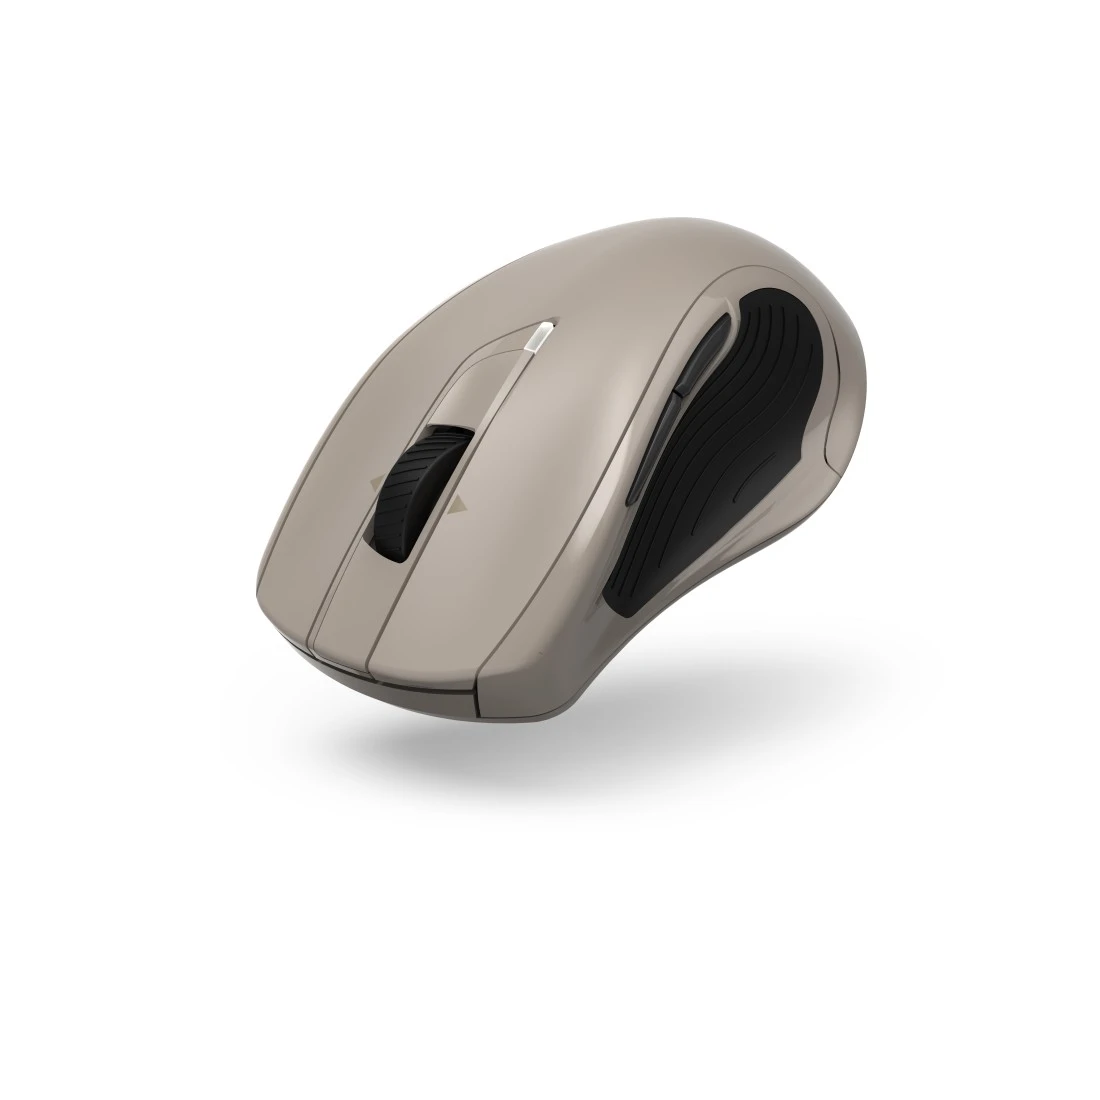 You Recently Viewed Hama 00173014 MW-800 V2 7-Button Laser Wireless Mouse, beige Image